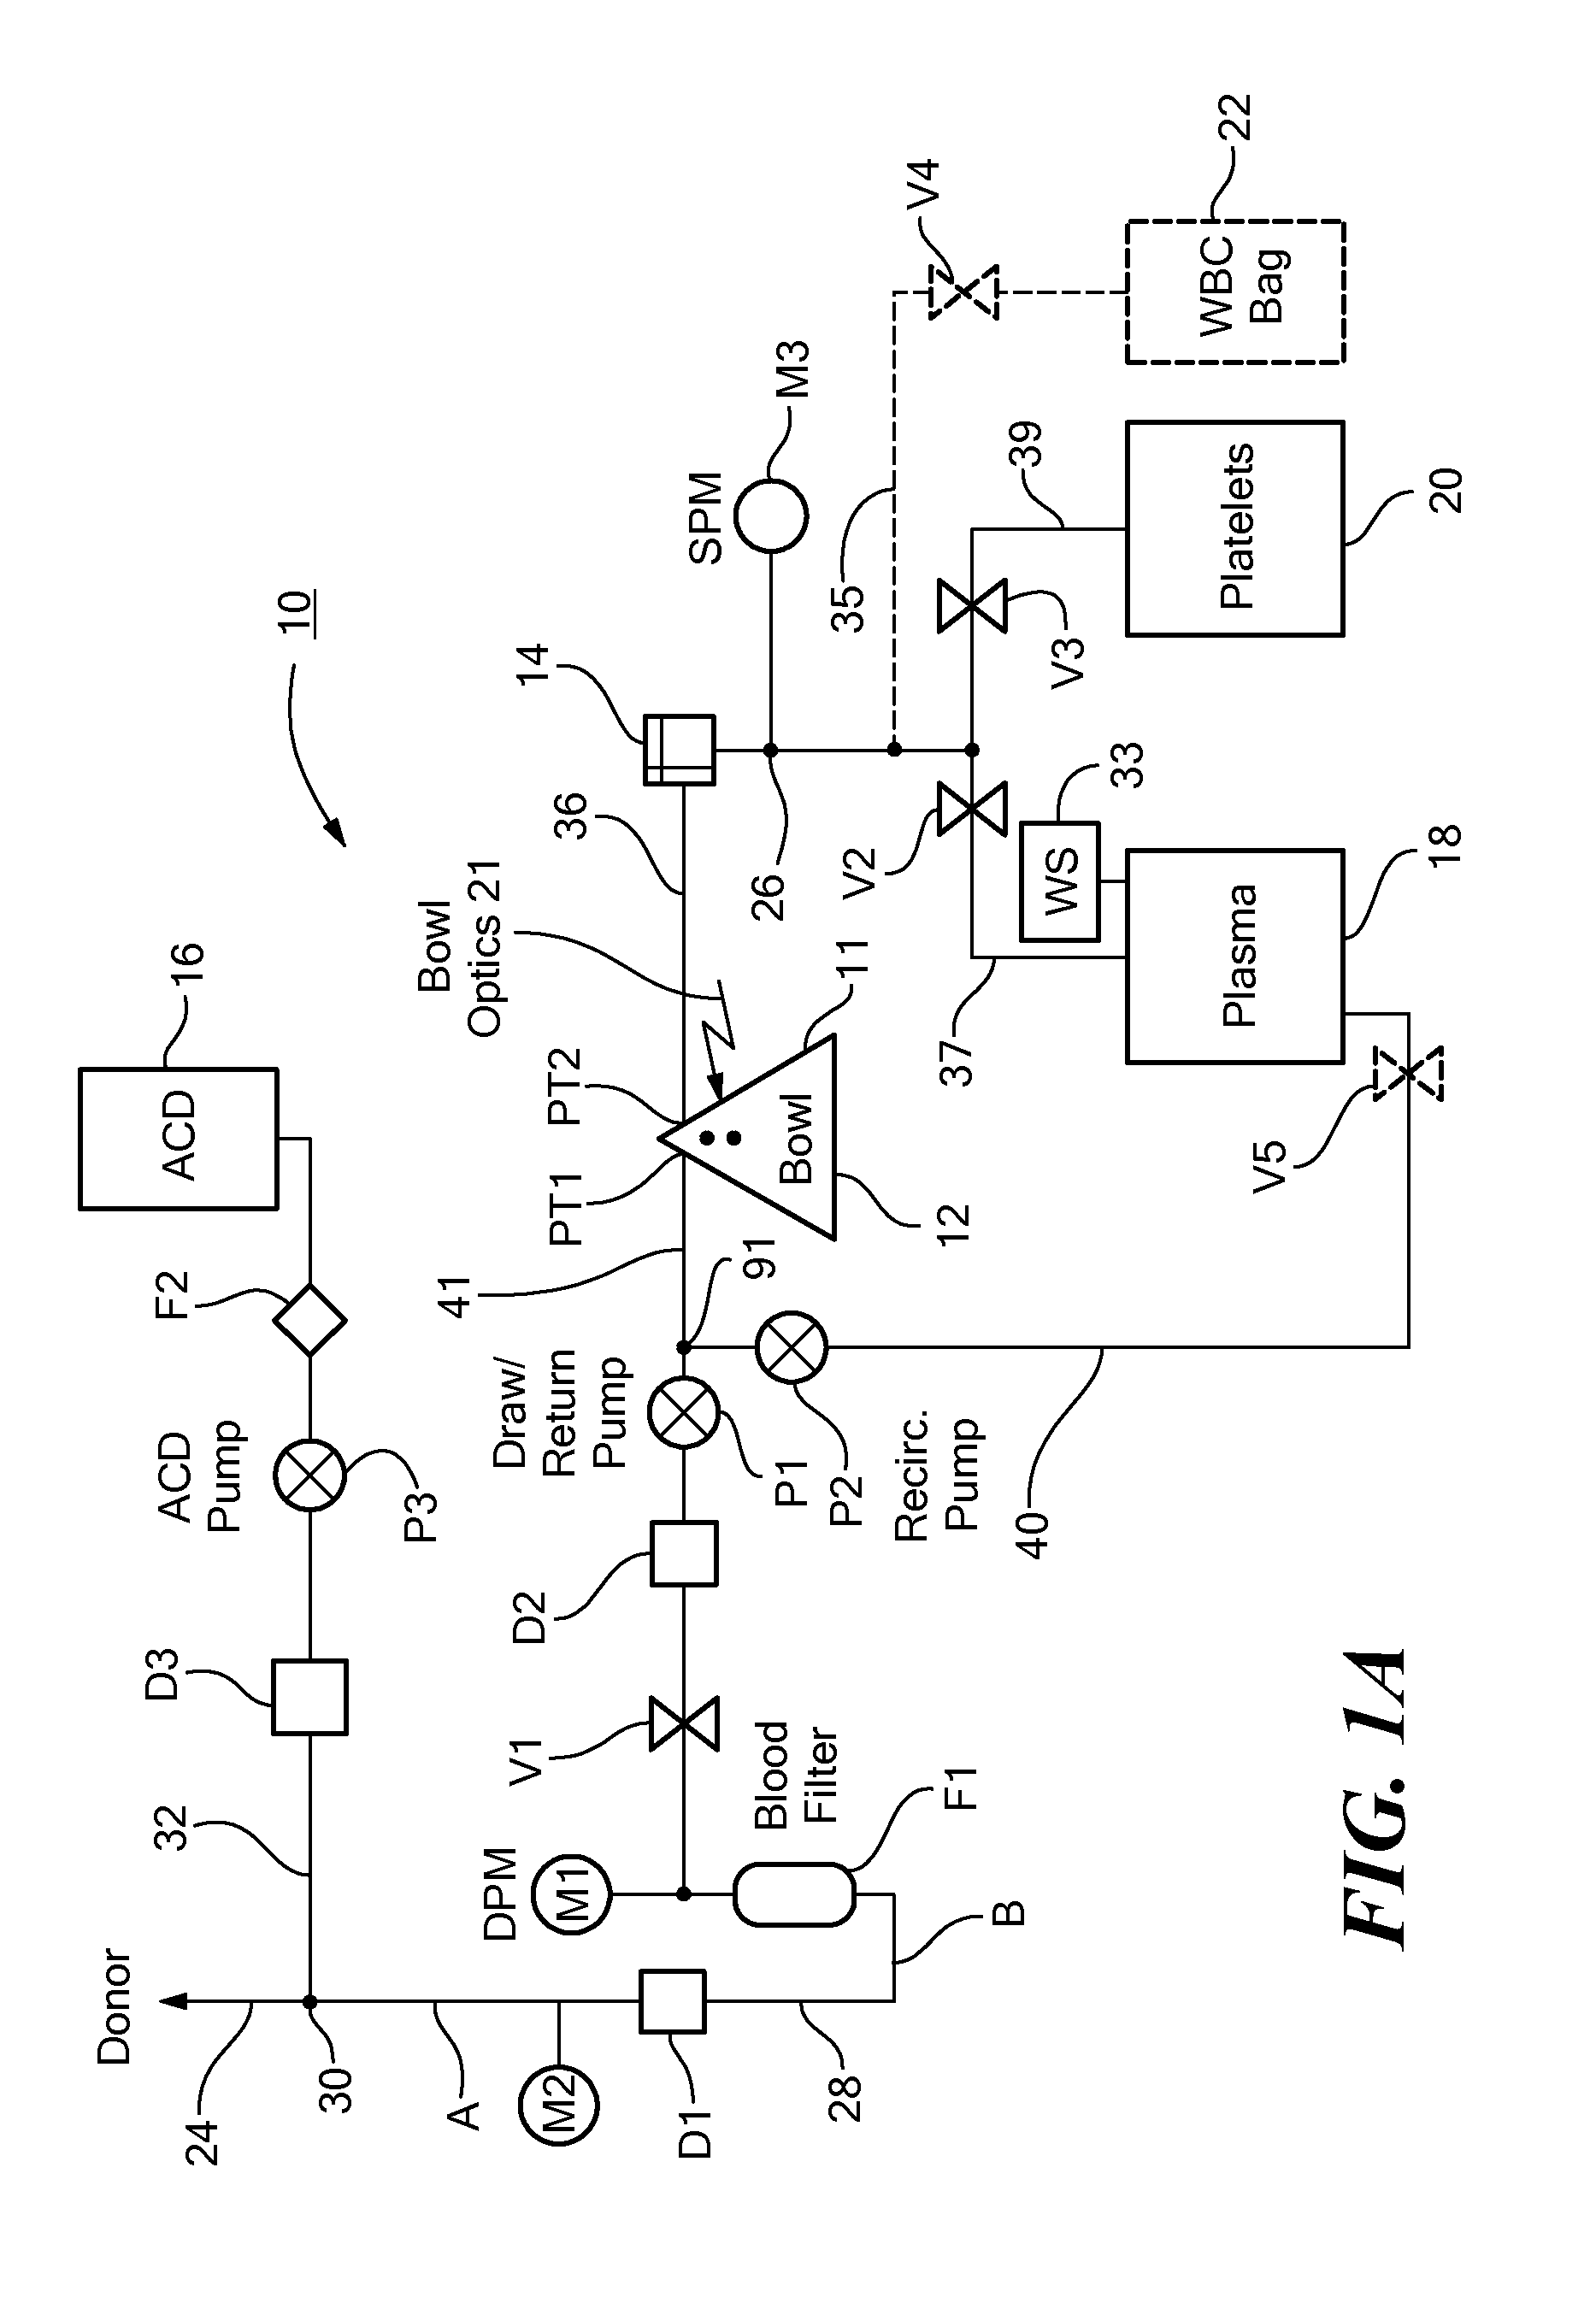 System and Method for Optimized Apheresis Draw and Return